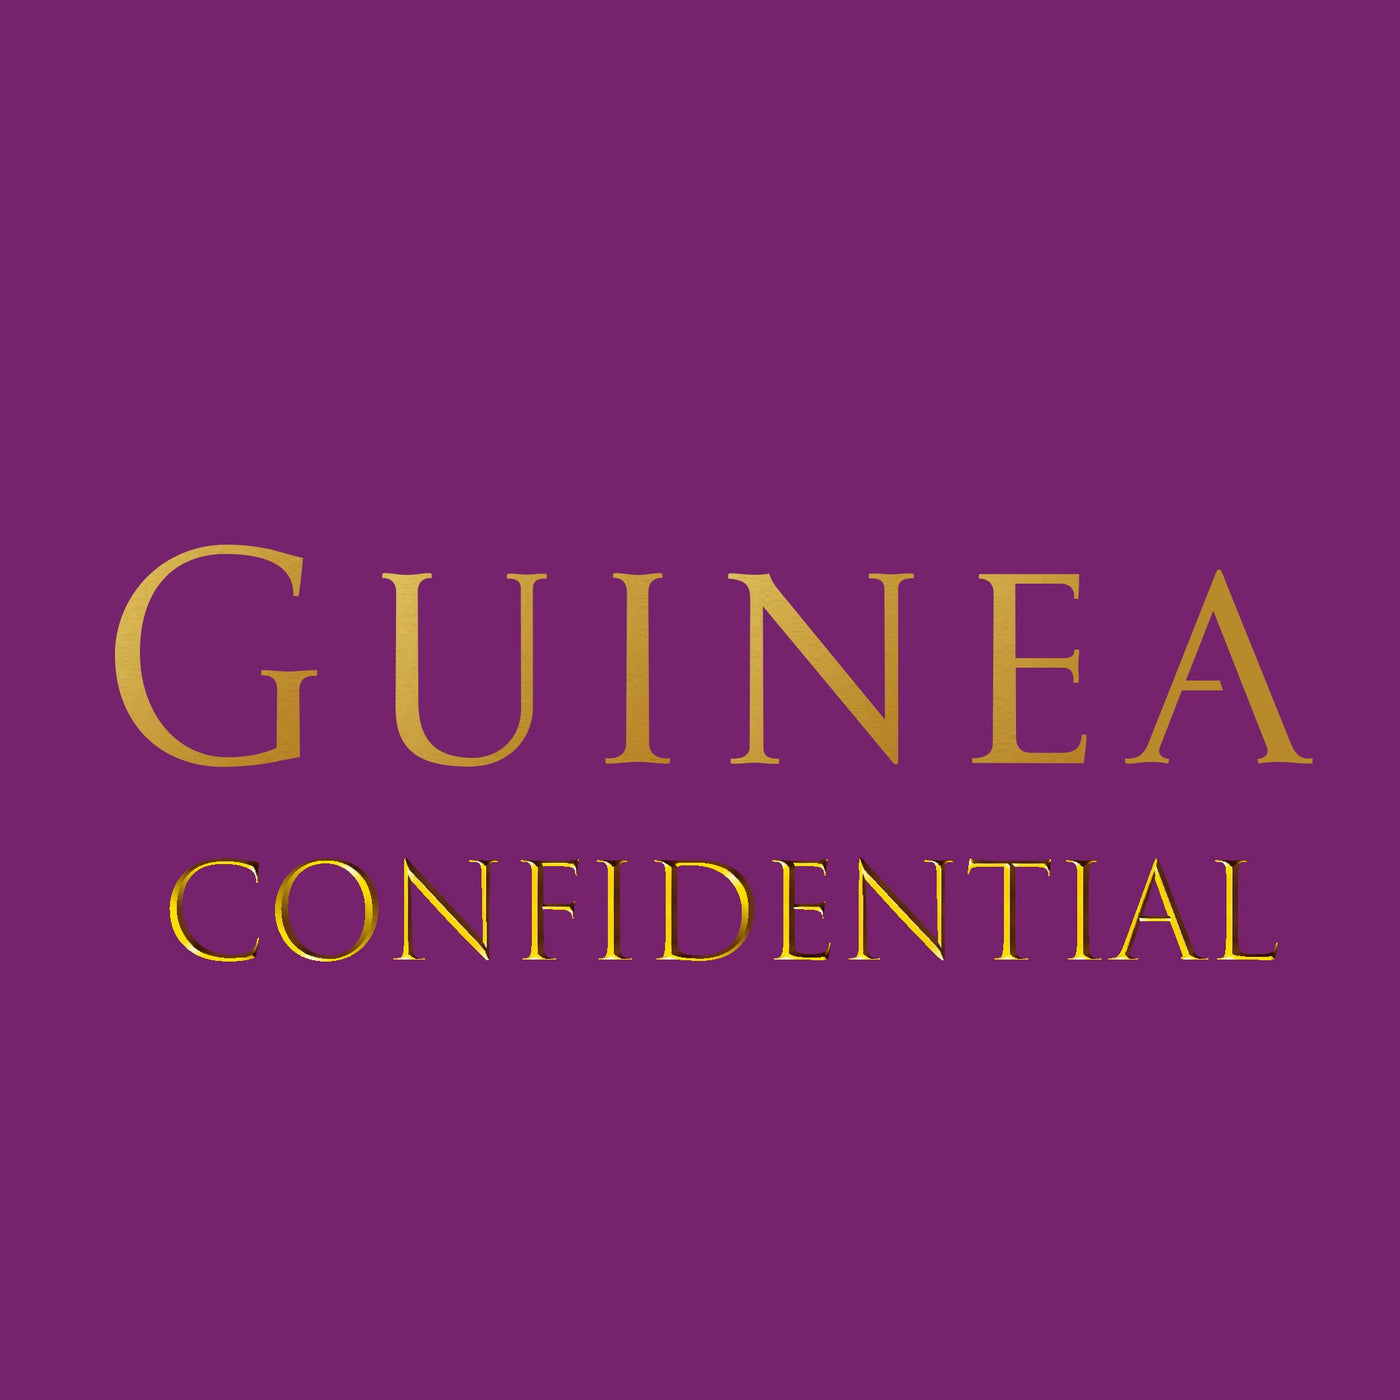 Guinea Confidential  logo of gold lettering on purple background